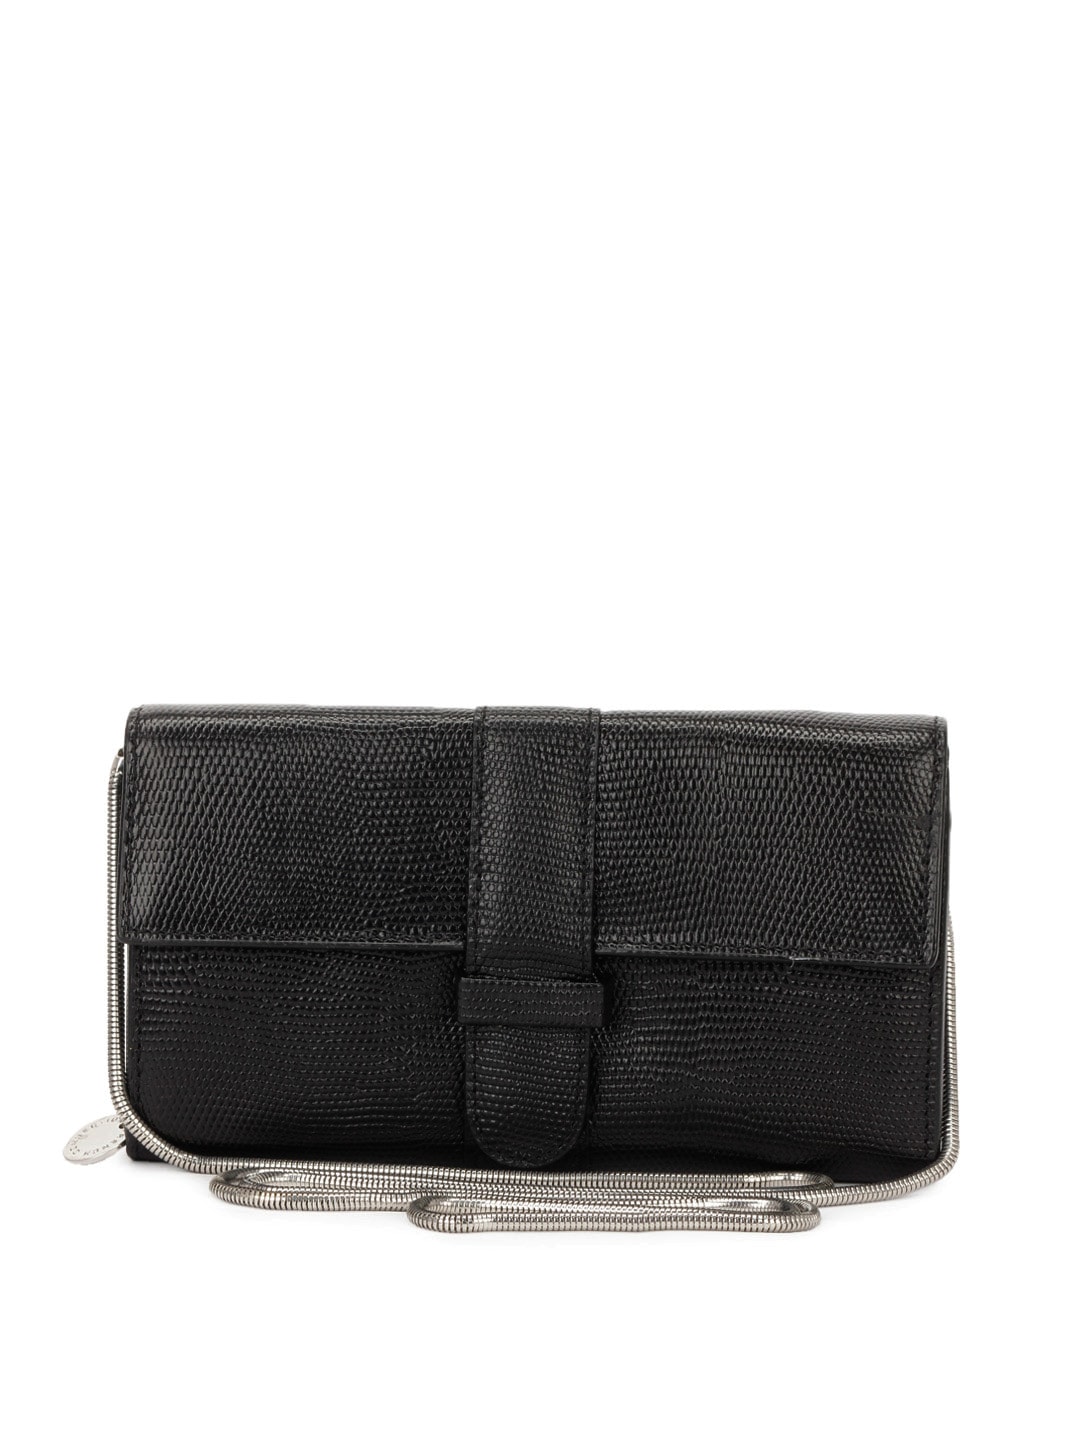 French Connection Women Black Purse